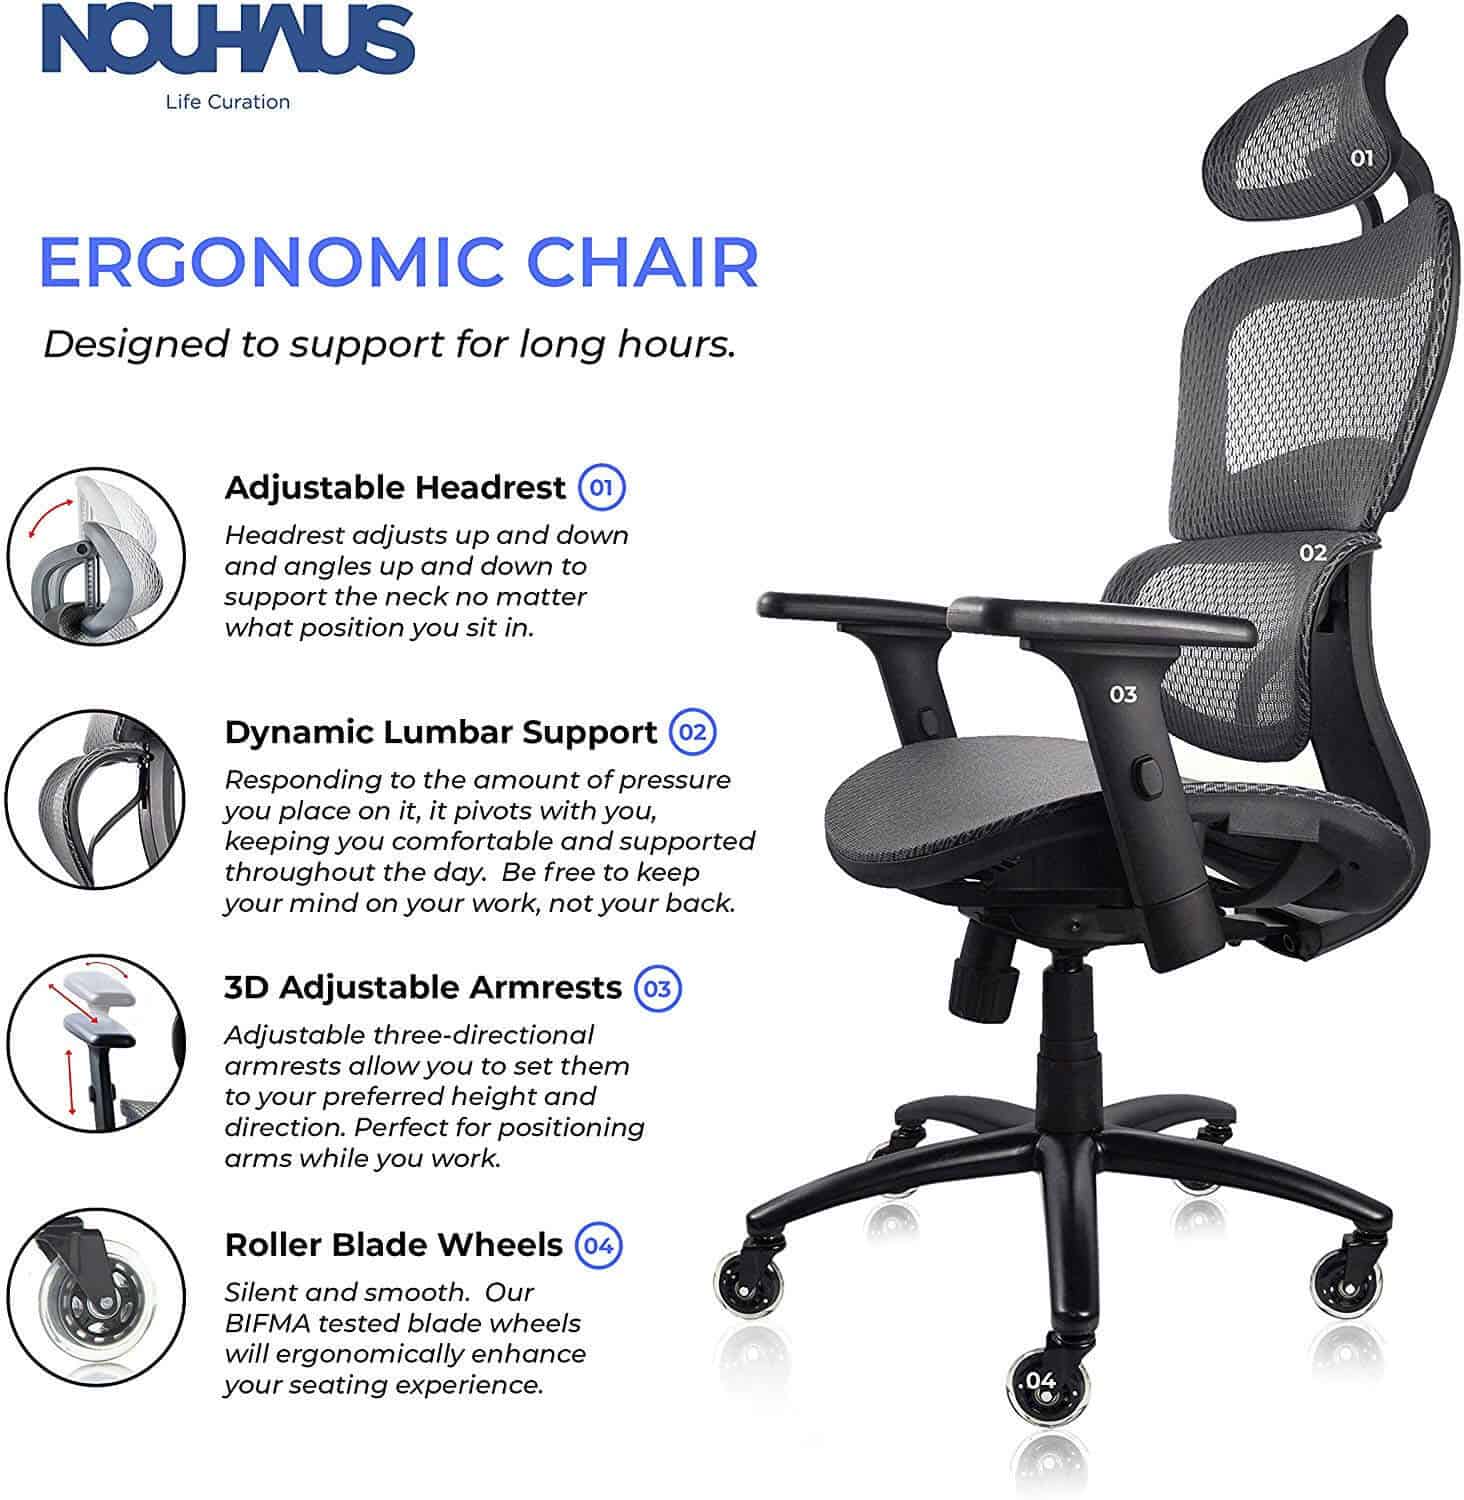 Nouhaus is a great pick of chair if you are pregnant